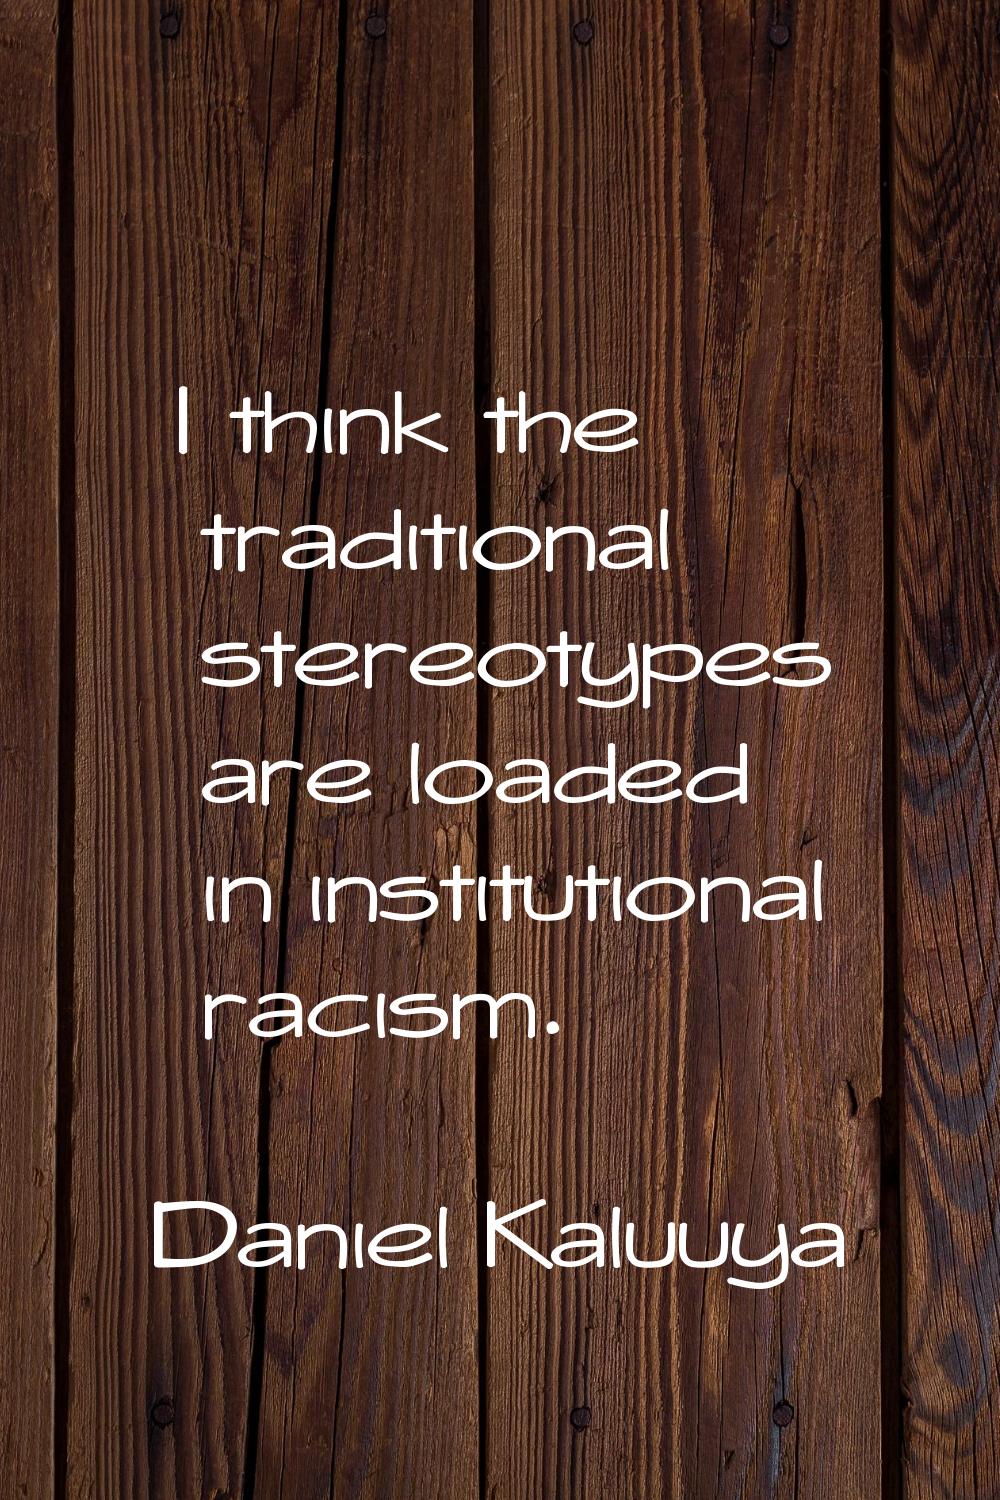 I think the traditional stereotypes are loaded in institutional racism.